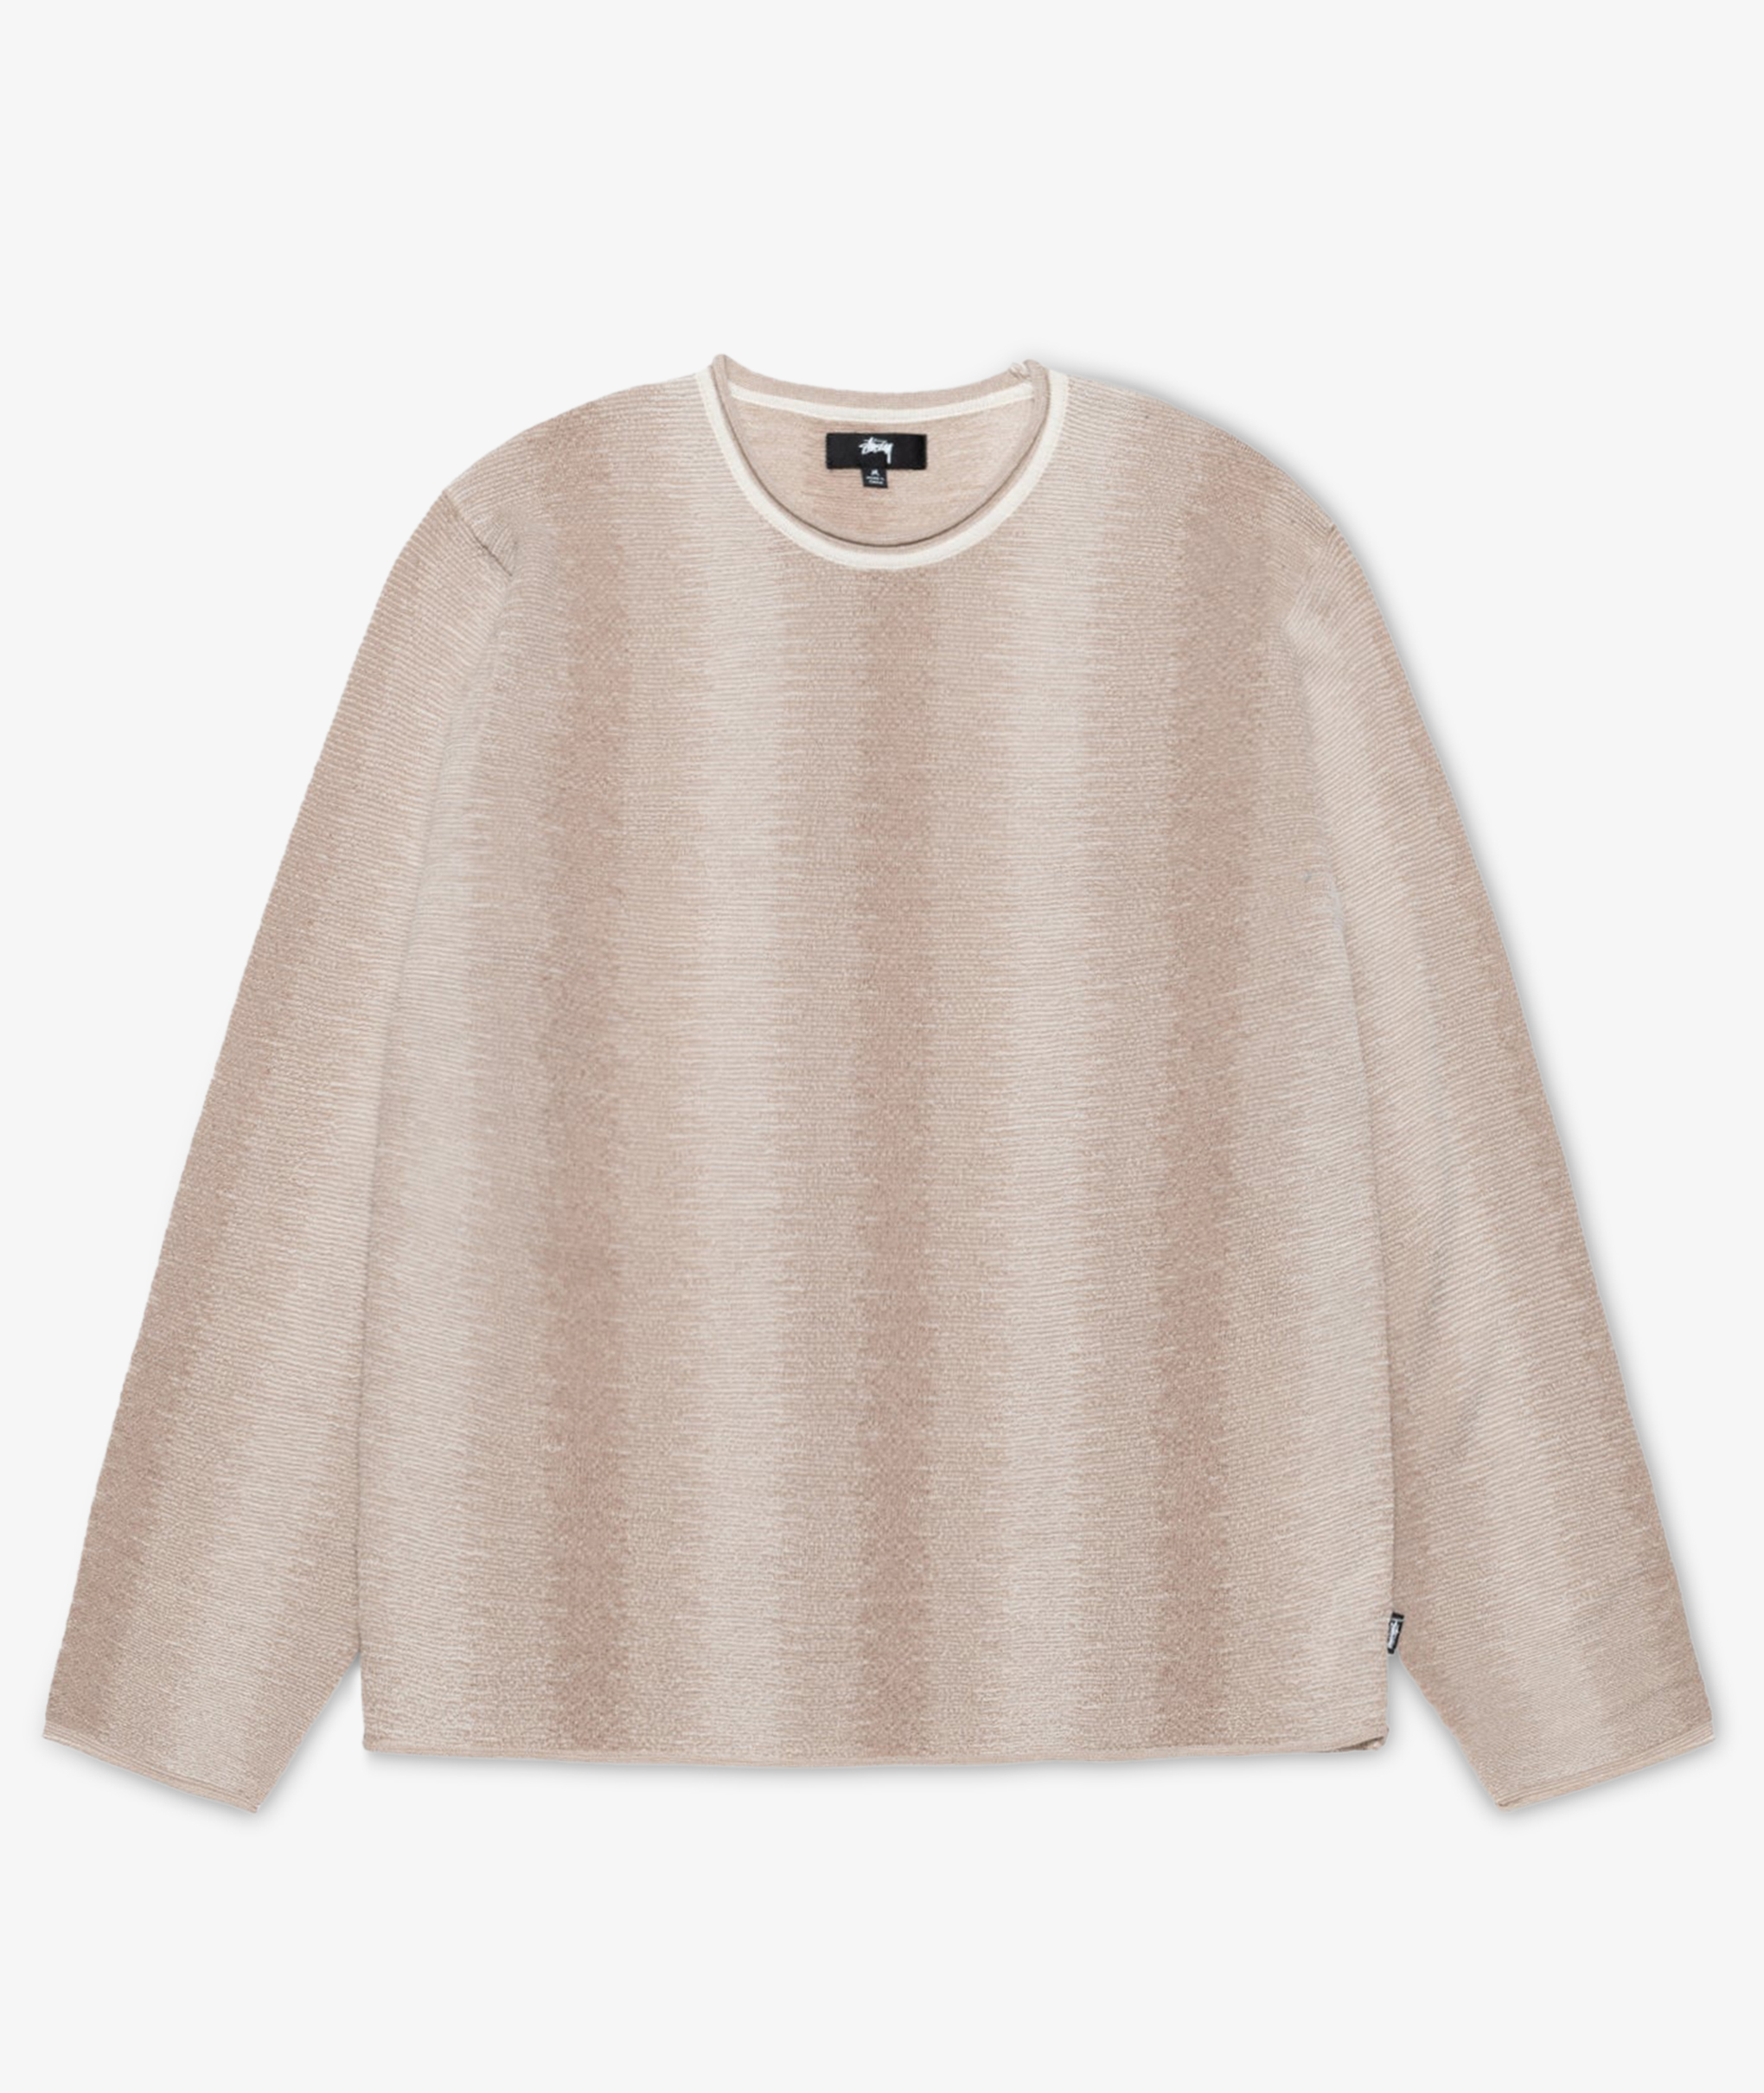 Norse Store  Shipping Worldwide - Stüssy Shadow Stripe Sweater - Natural